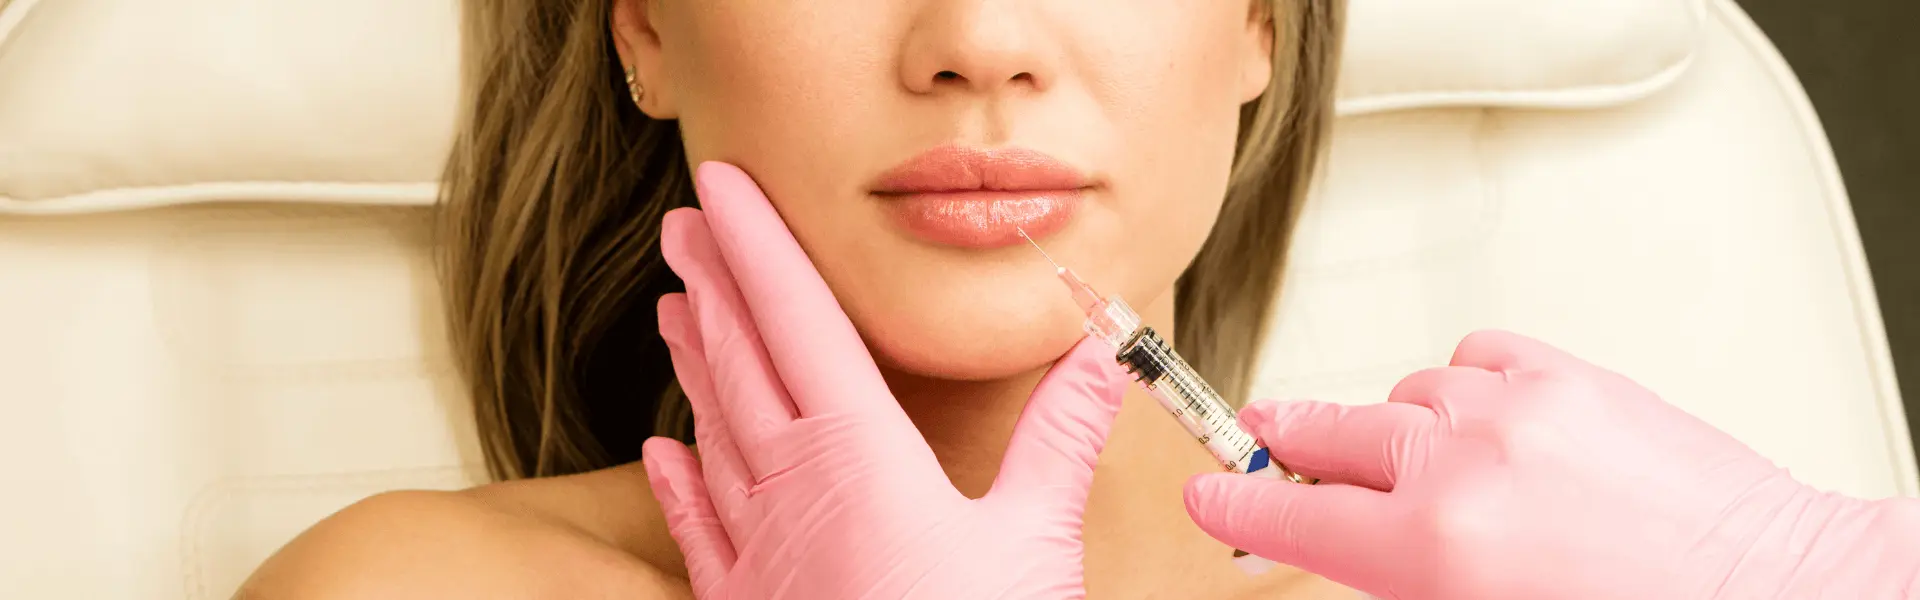 A woman getting a lip injection in a clinic.